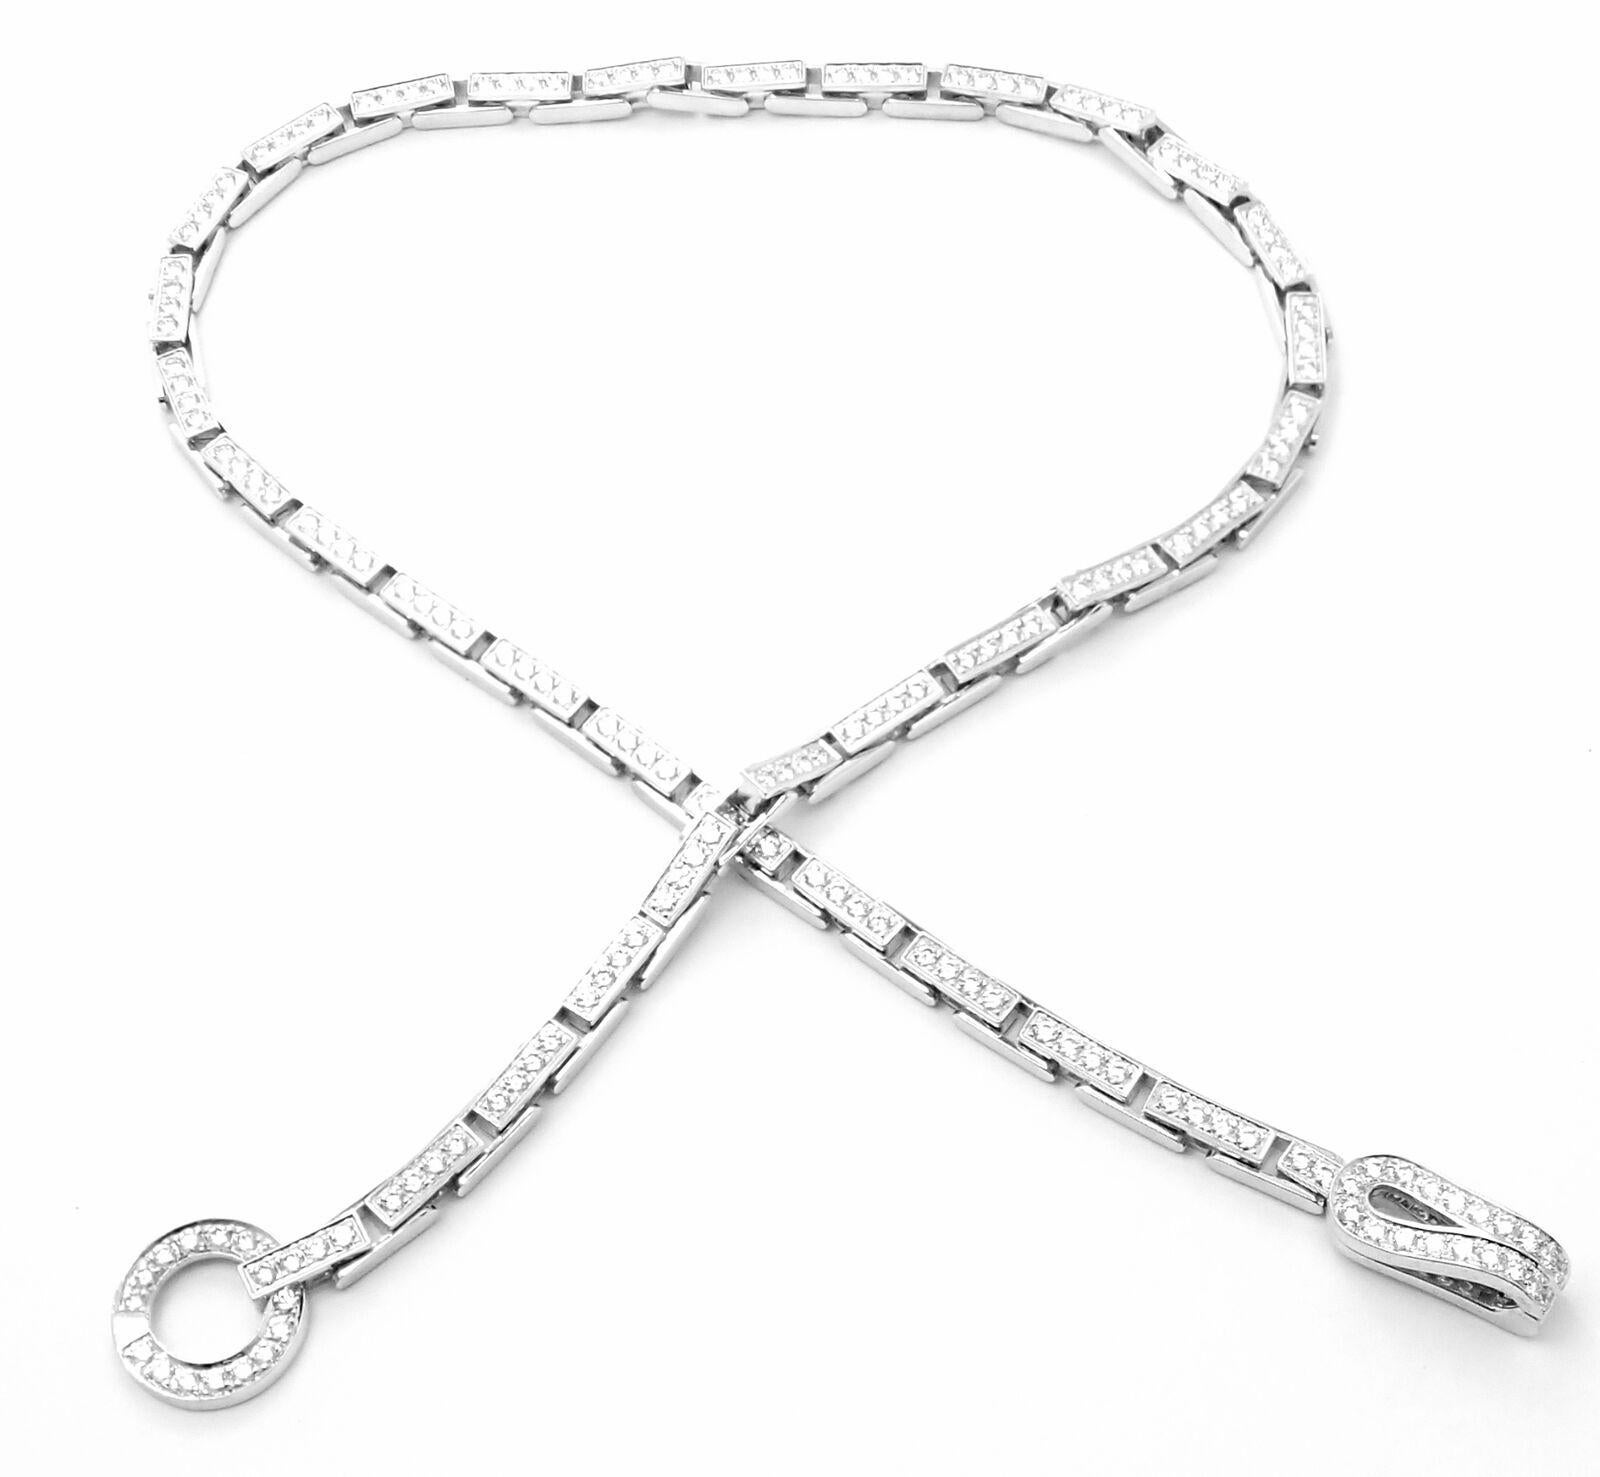 Cartier Agrafe Full Diamond Link White Gold Necklace Certificate For Sale 3